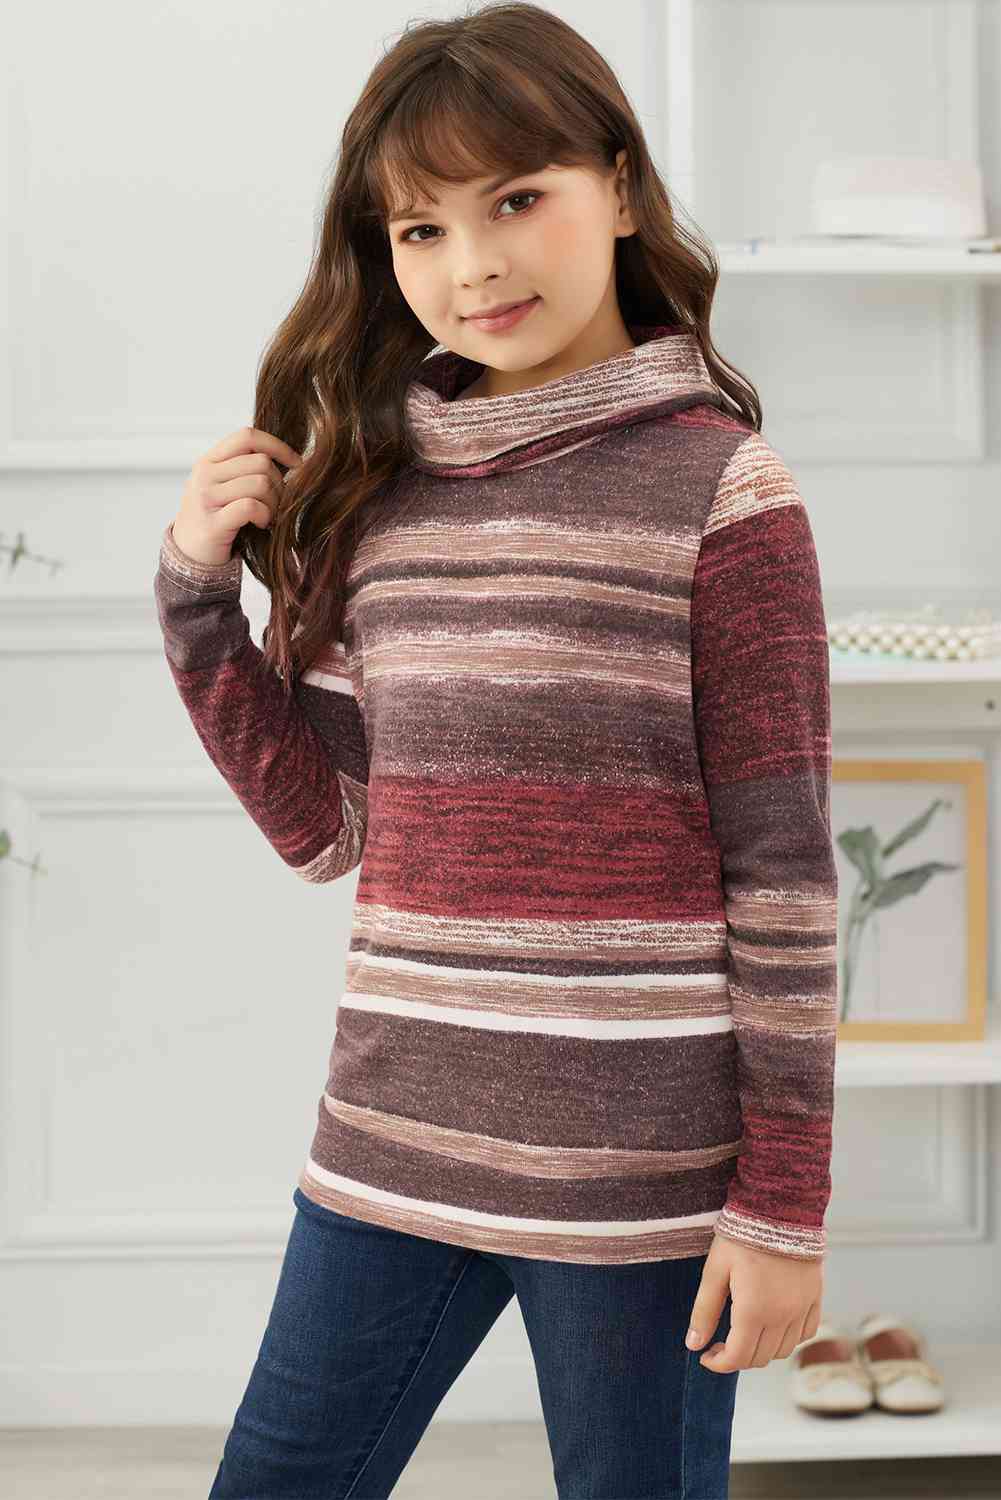 Girls Striped Cowl Neck Top with Pockets Girls Tops JT's Designer Fashion